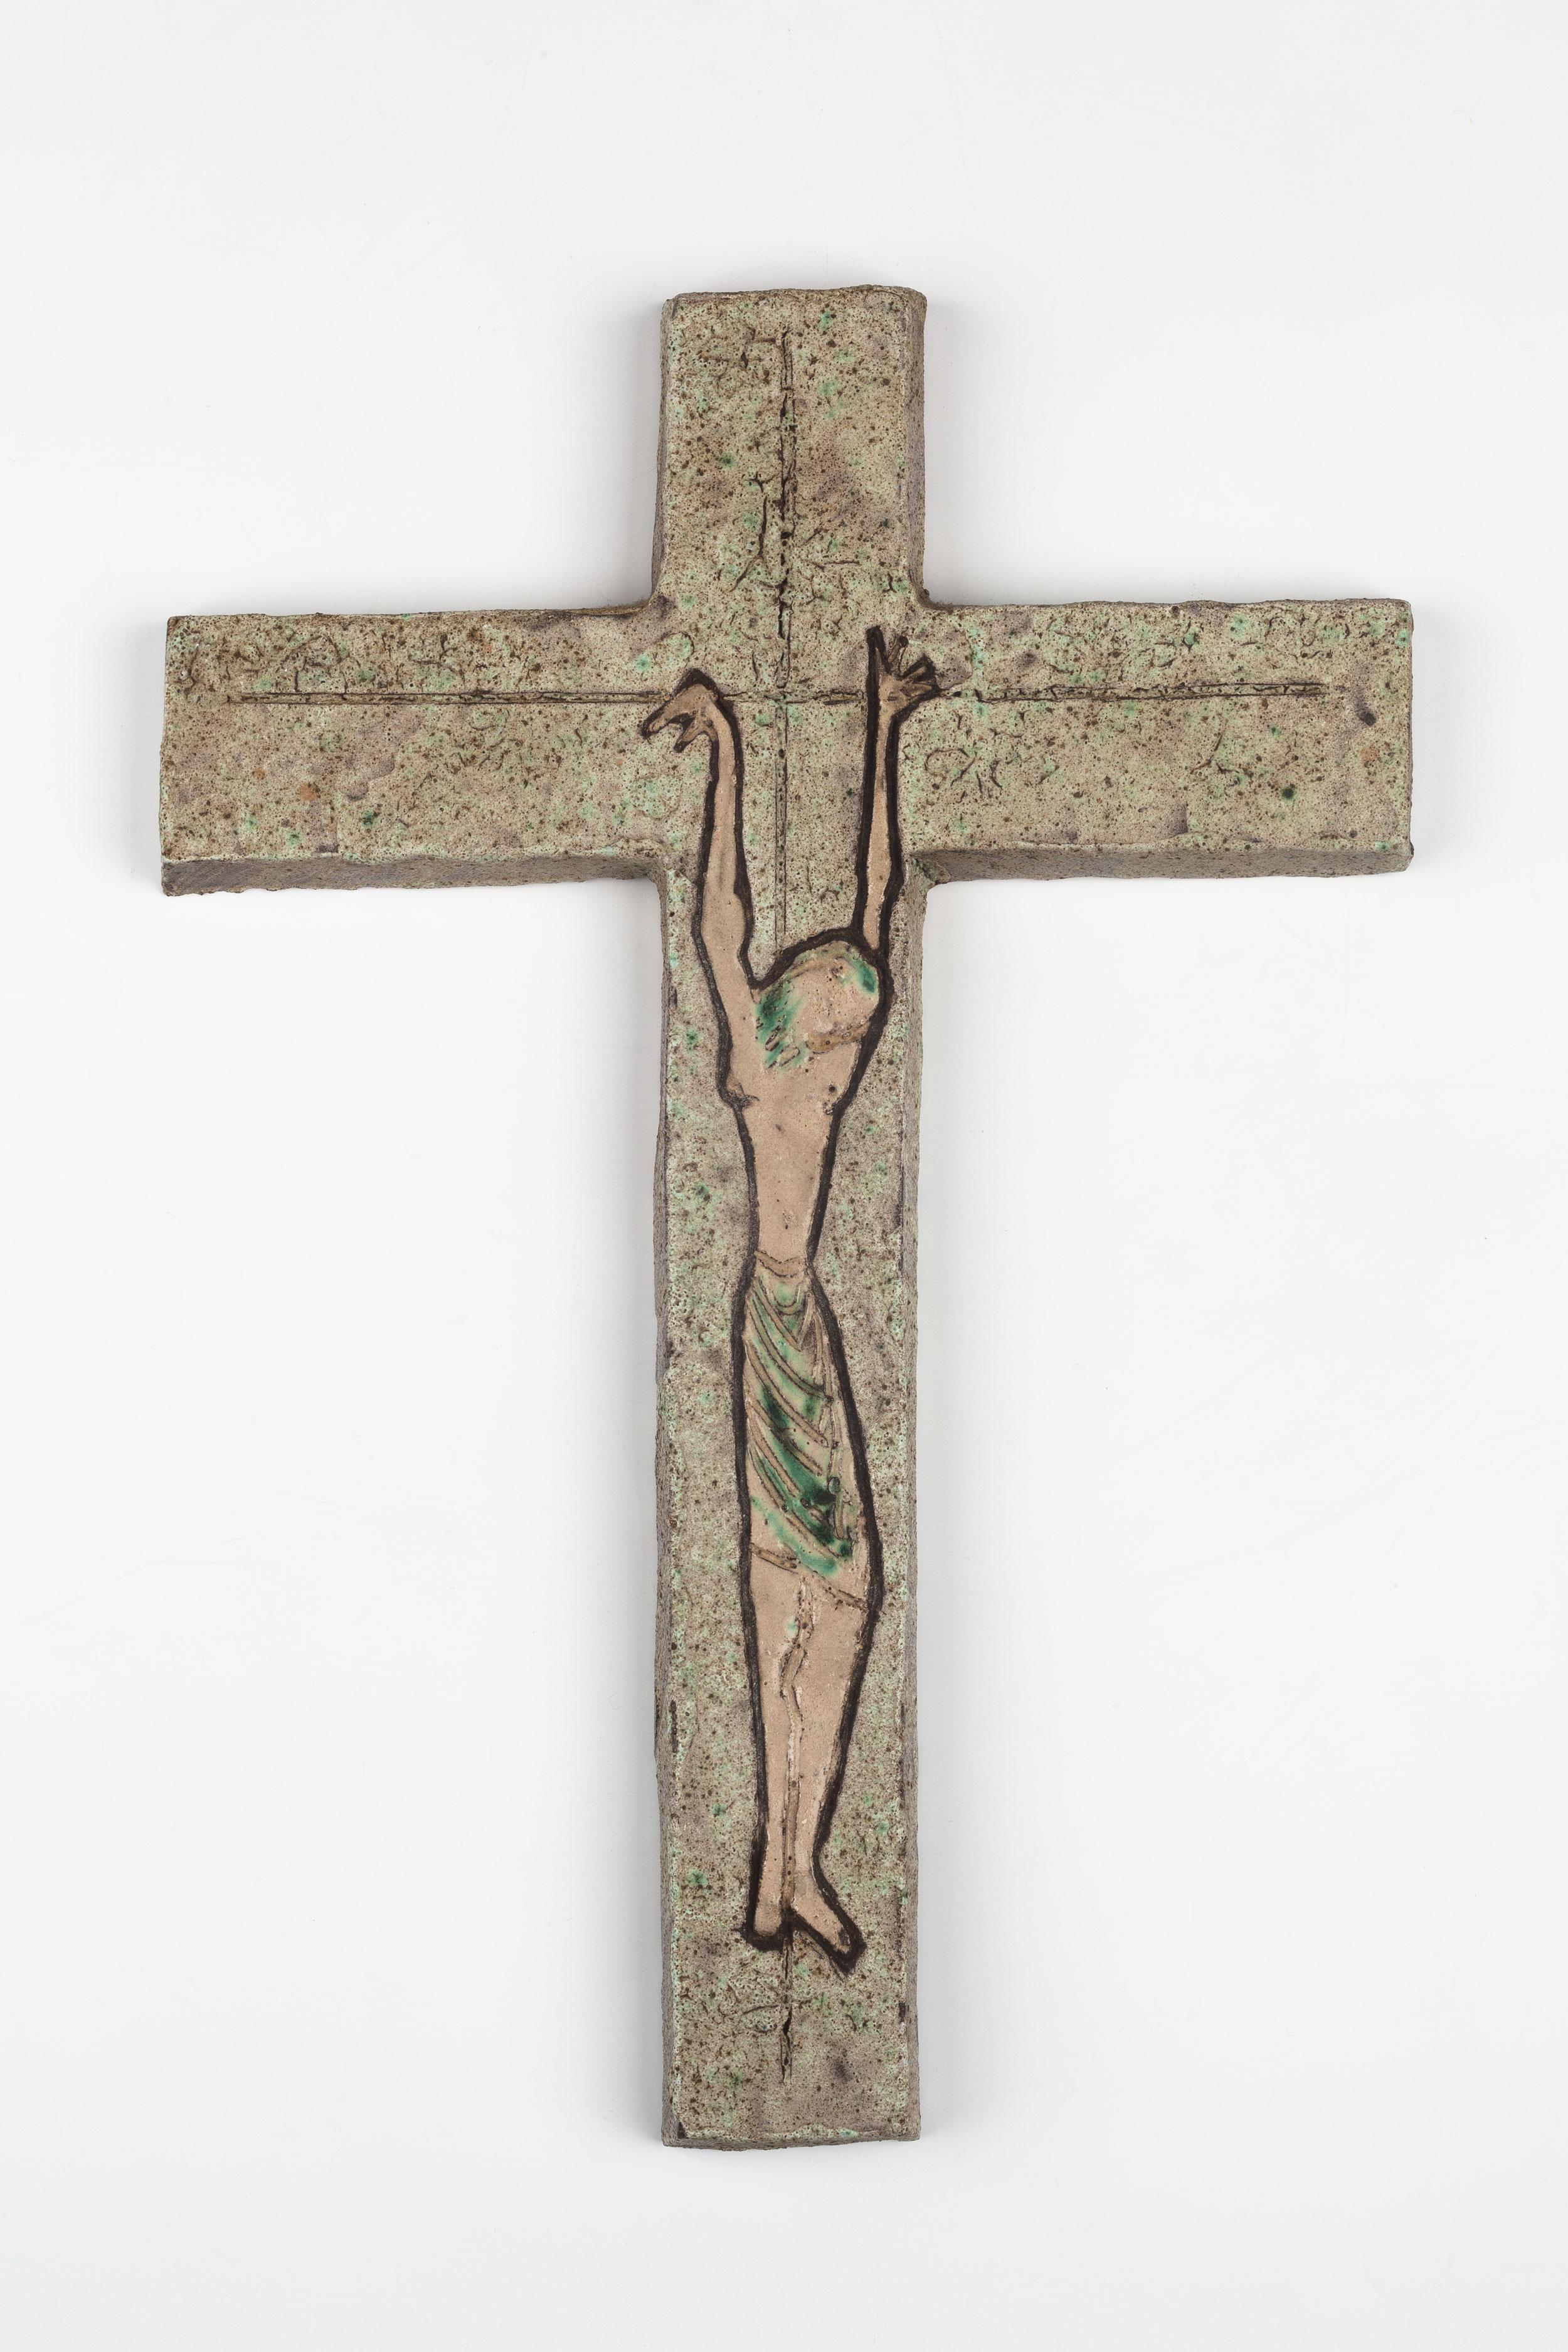 Early 1980s European crucifix hand-painted in matte pastel and earth colors. Brutalist, naive, and even 